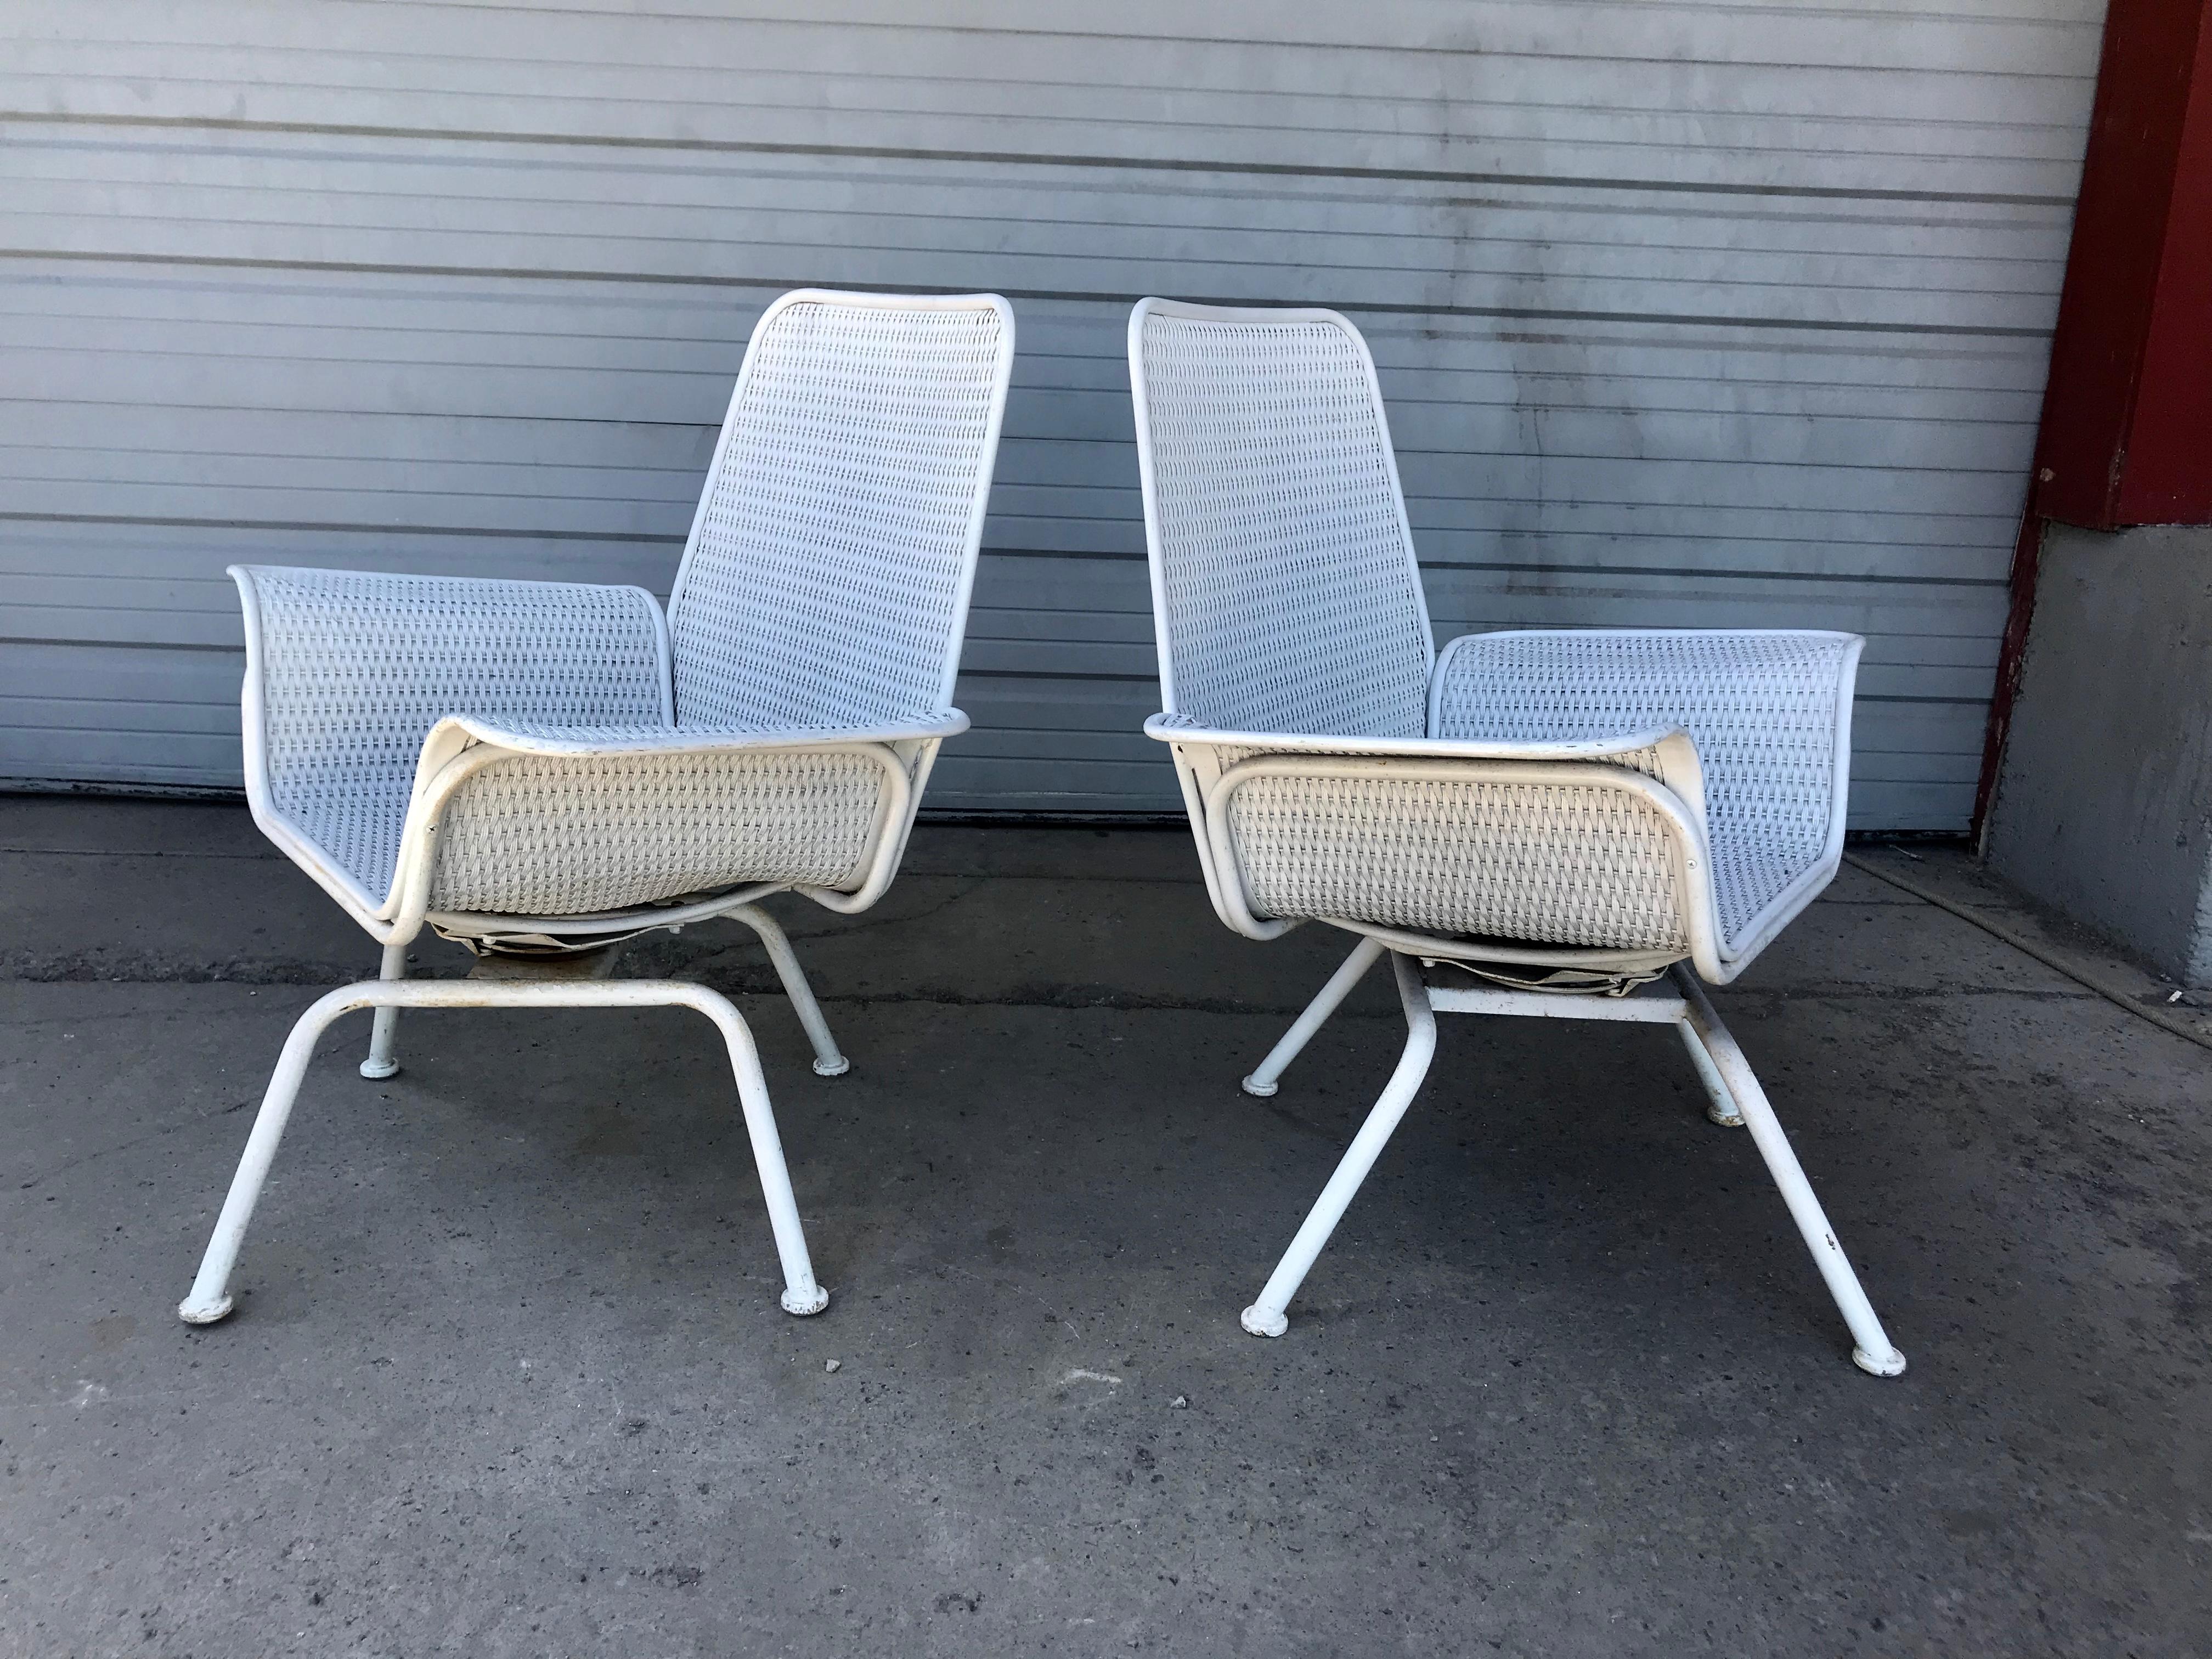 Pair of Mid-Century Modern Wicker and Metal Outdoor Lounge Chairs, Woodard 2